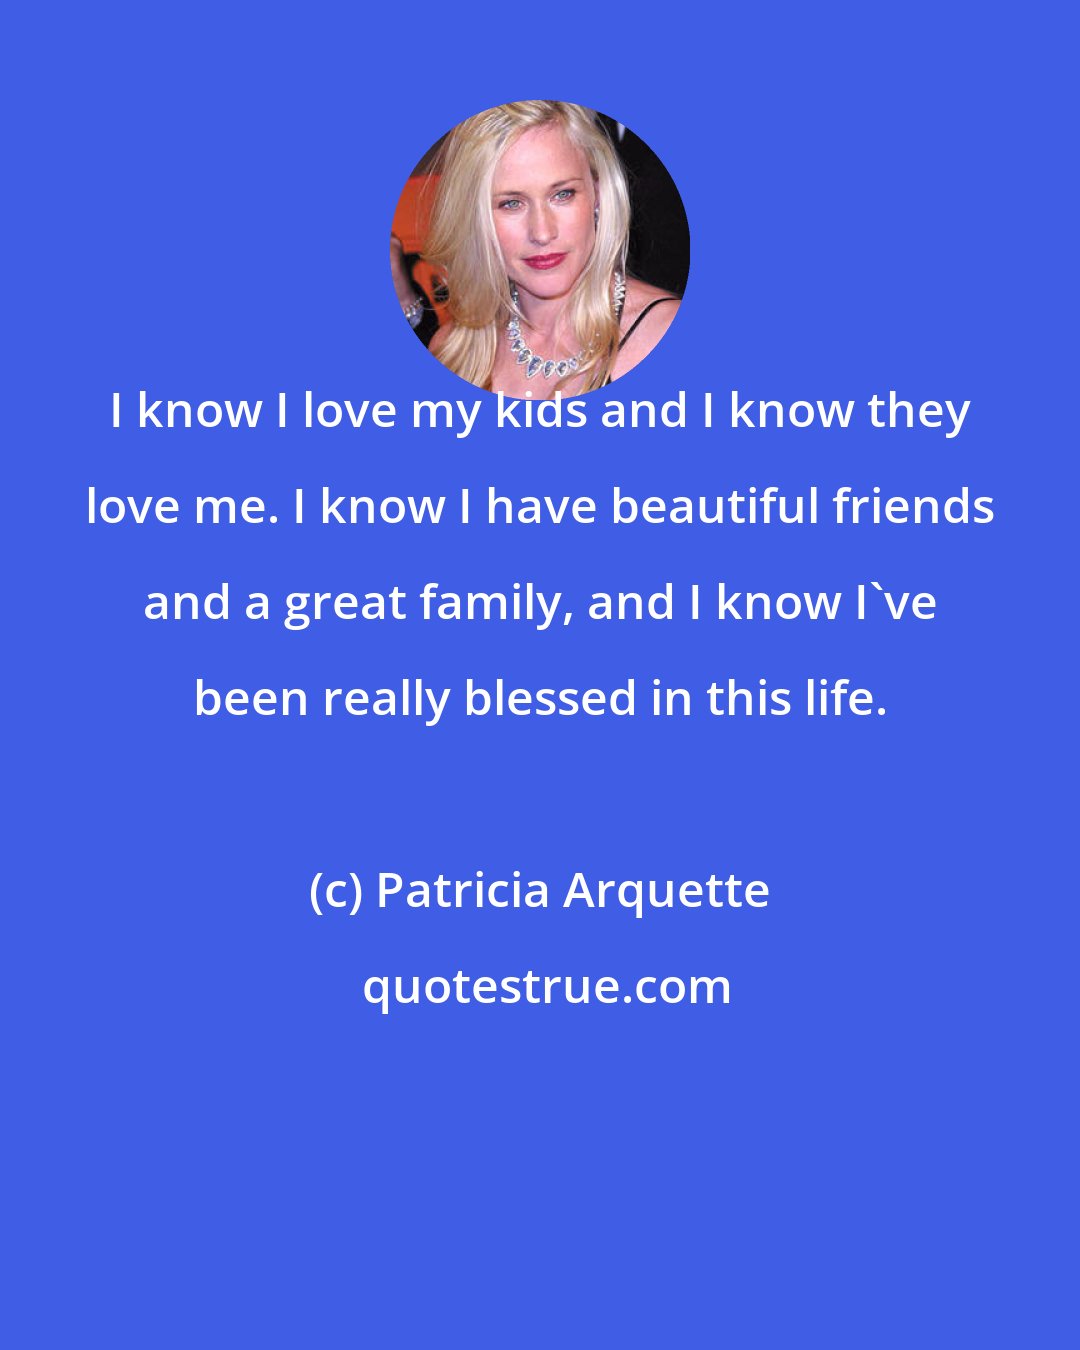 Patricia Arquette: I know I love my kids and I know they love me. I know I have beautiful friends and a great family, and I know I've been really blessed in this life.